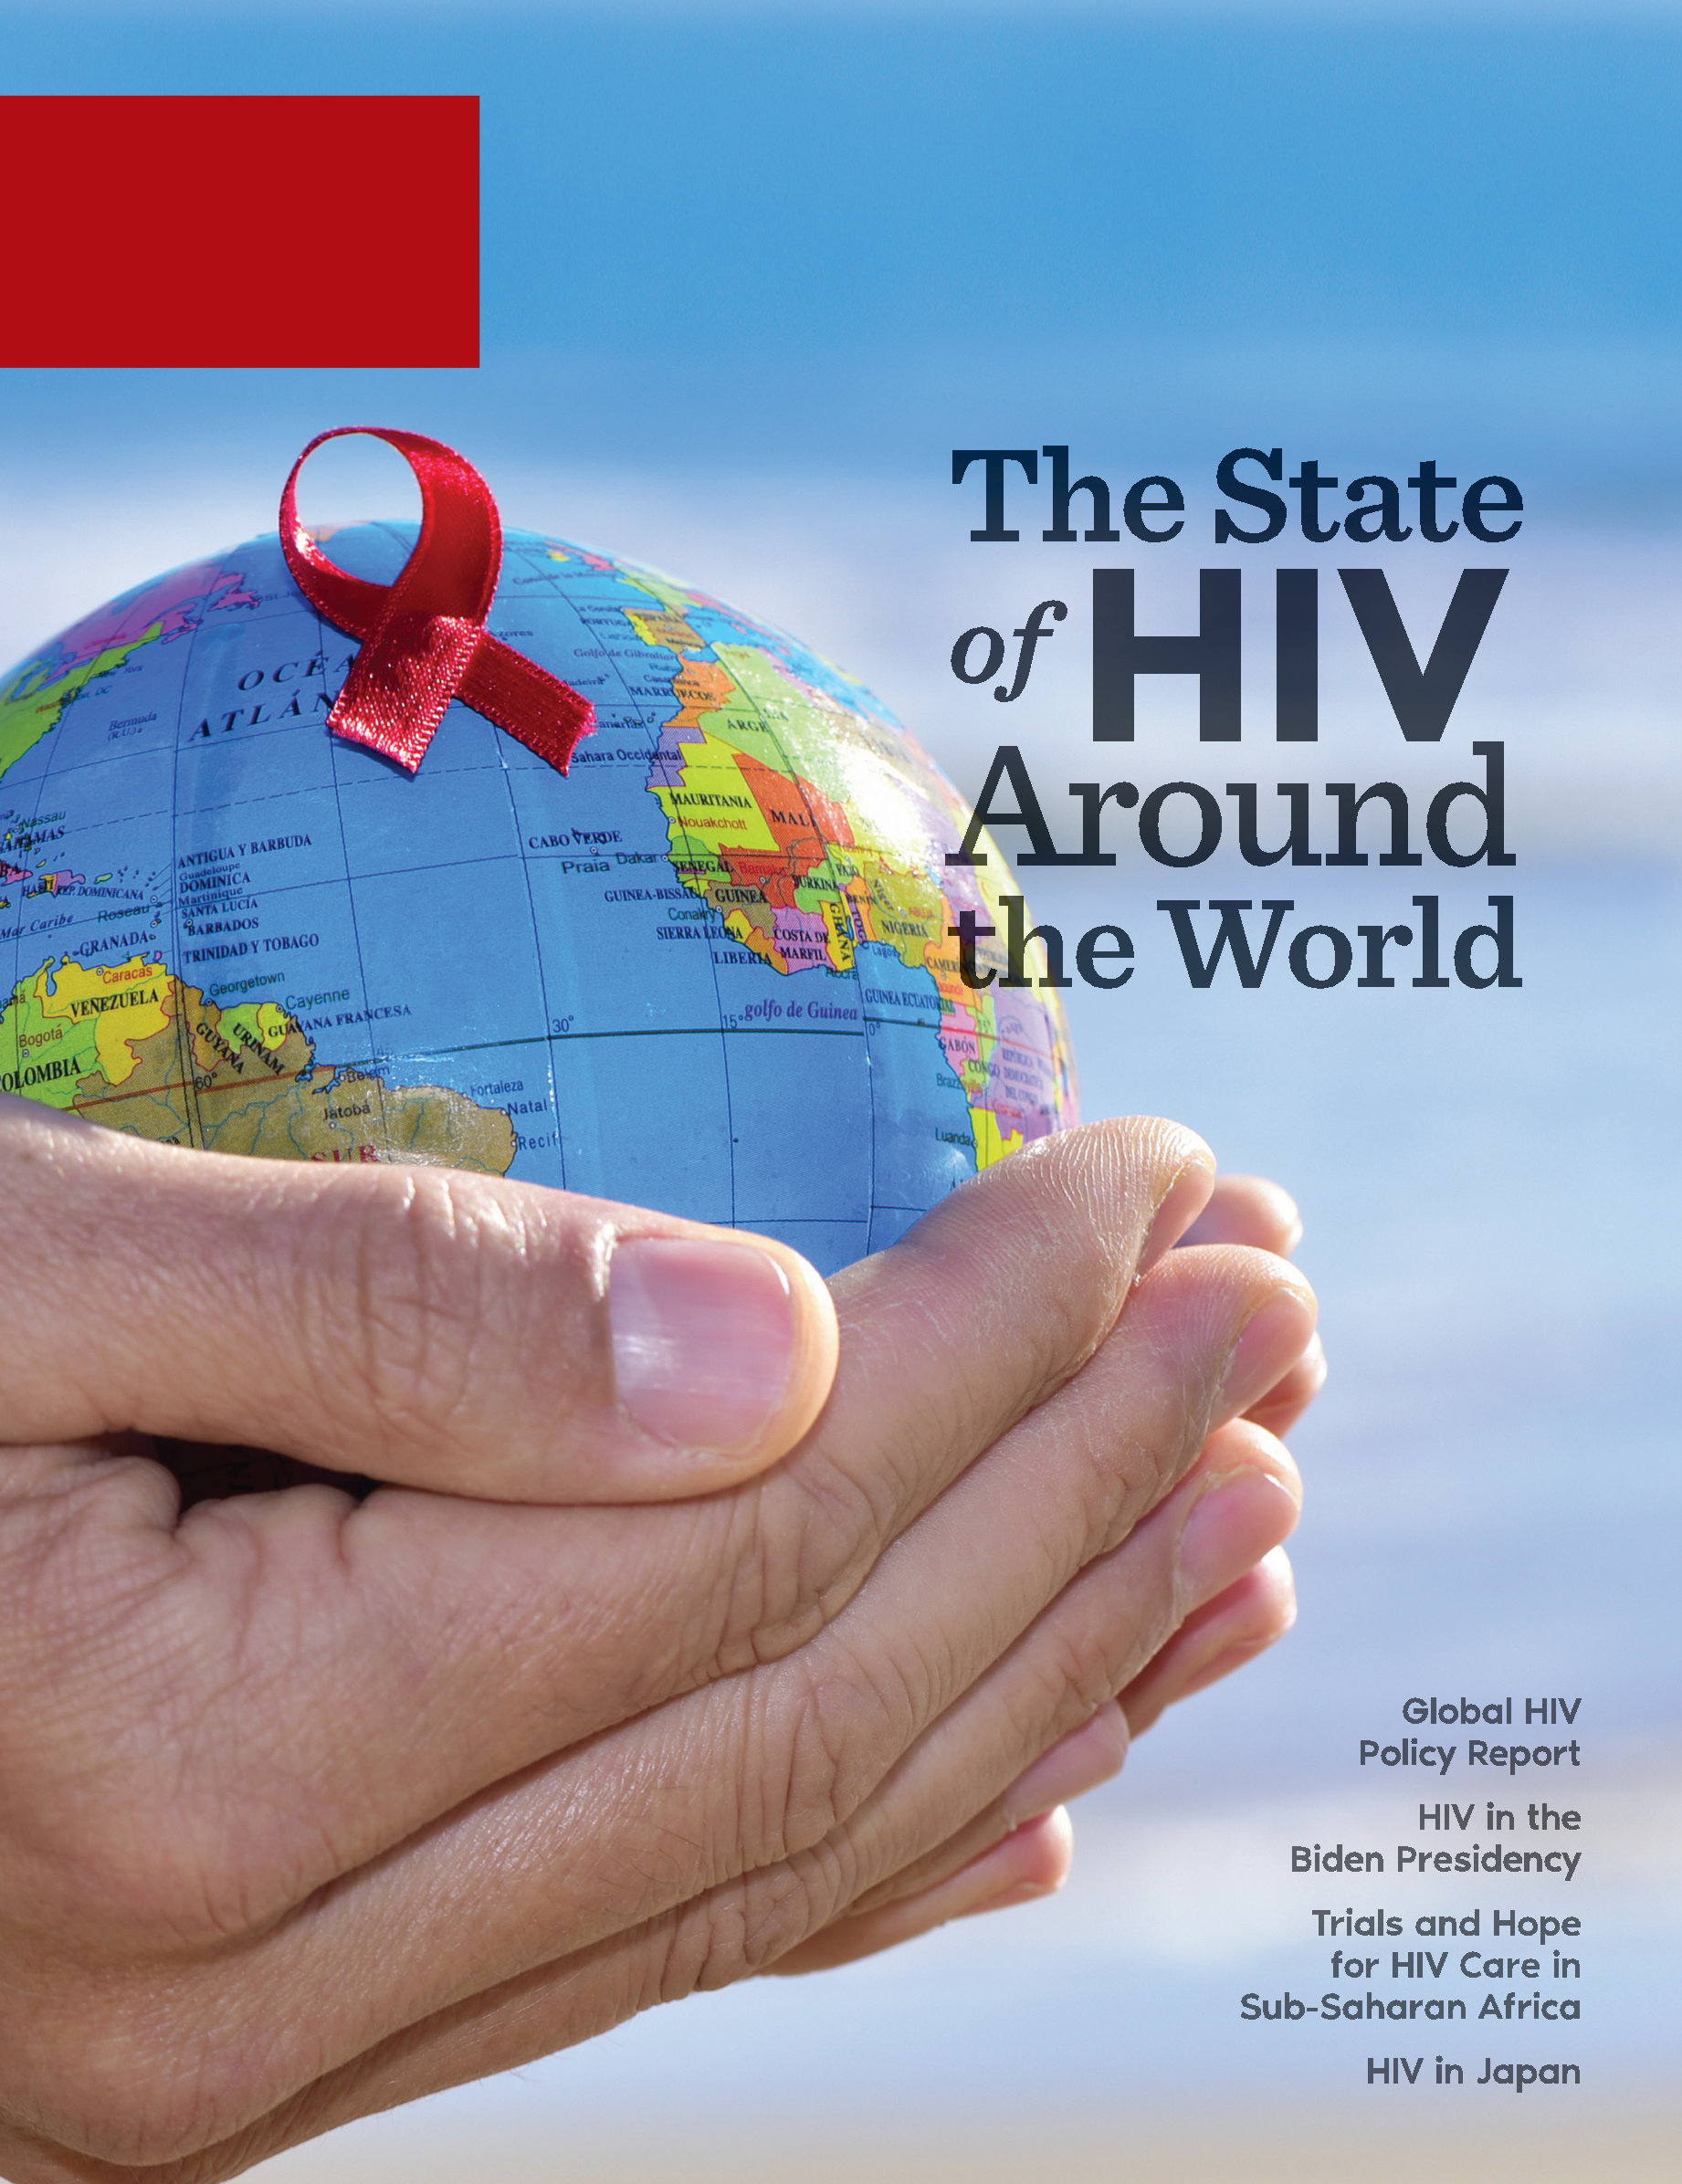 HIV Specialist: The State of HIV Around the World